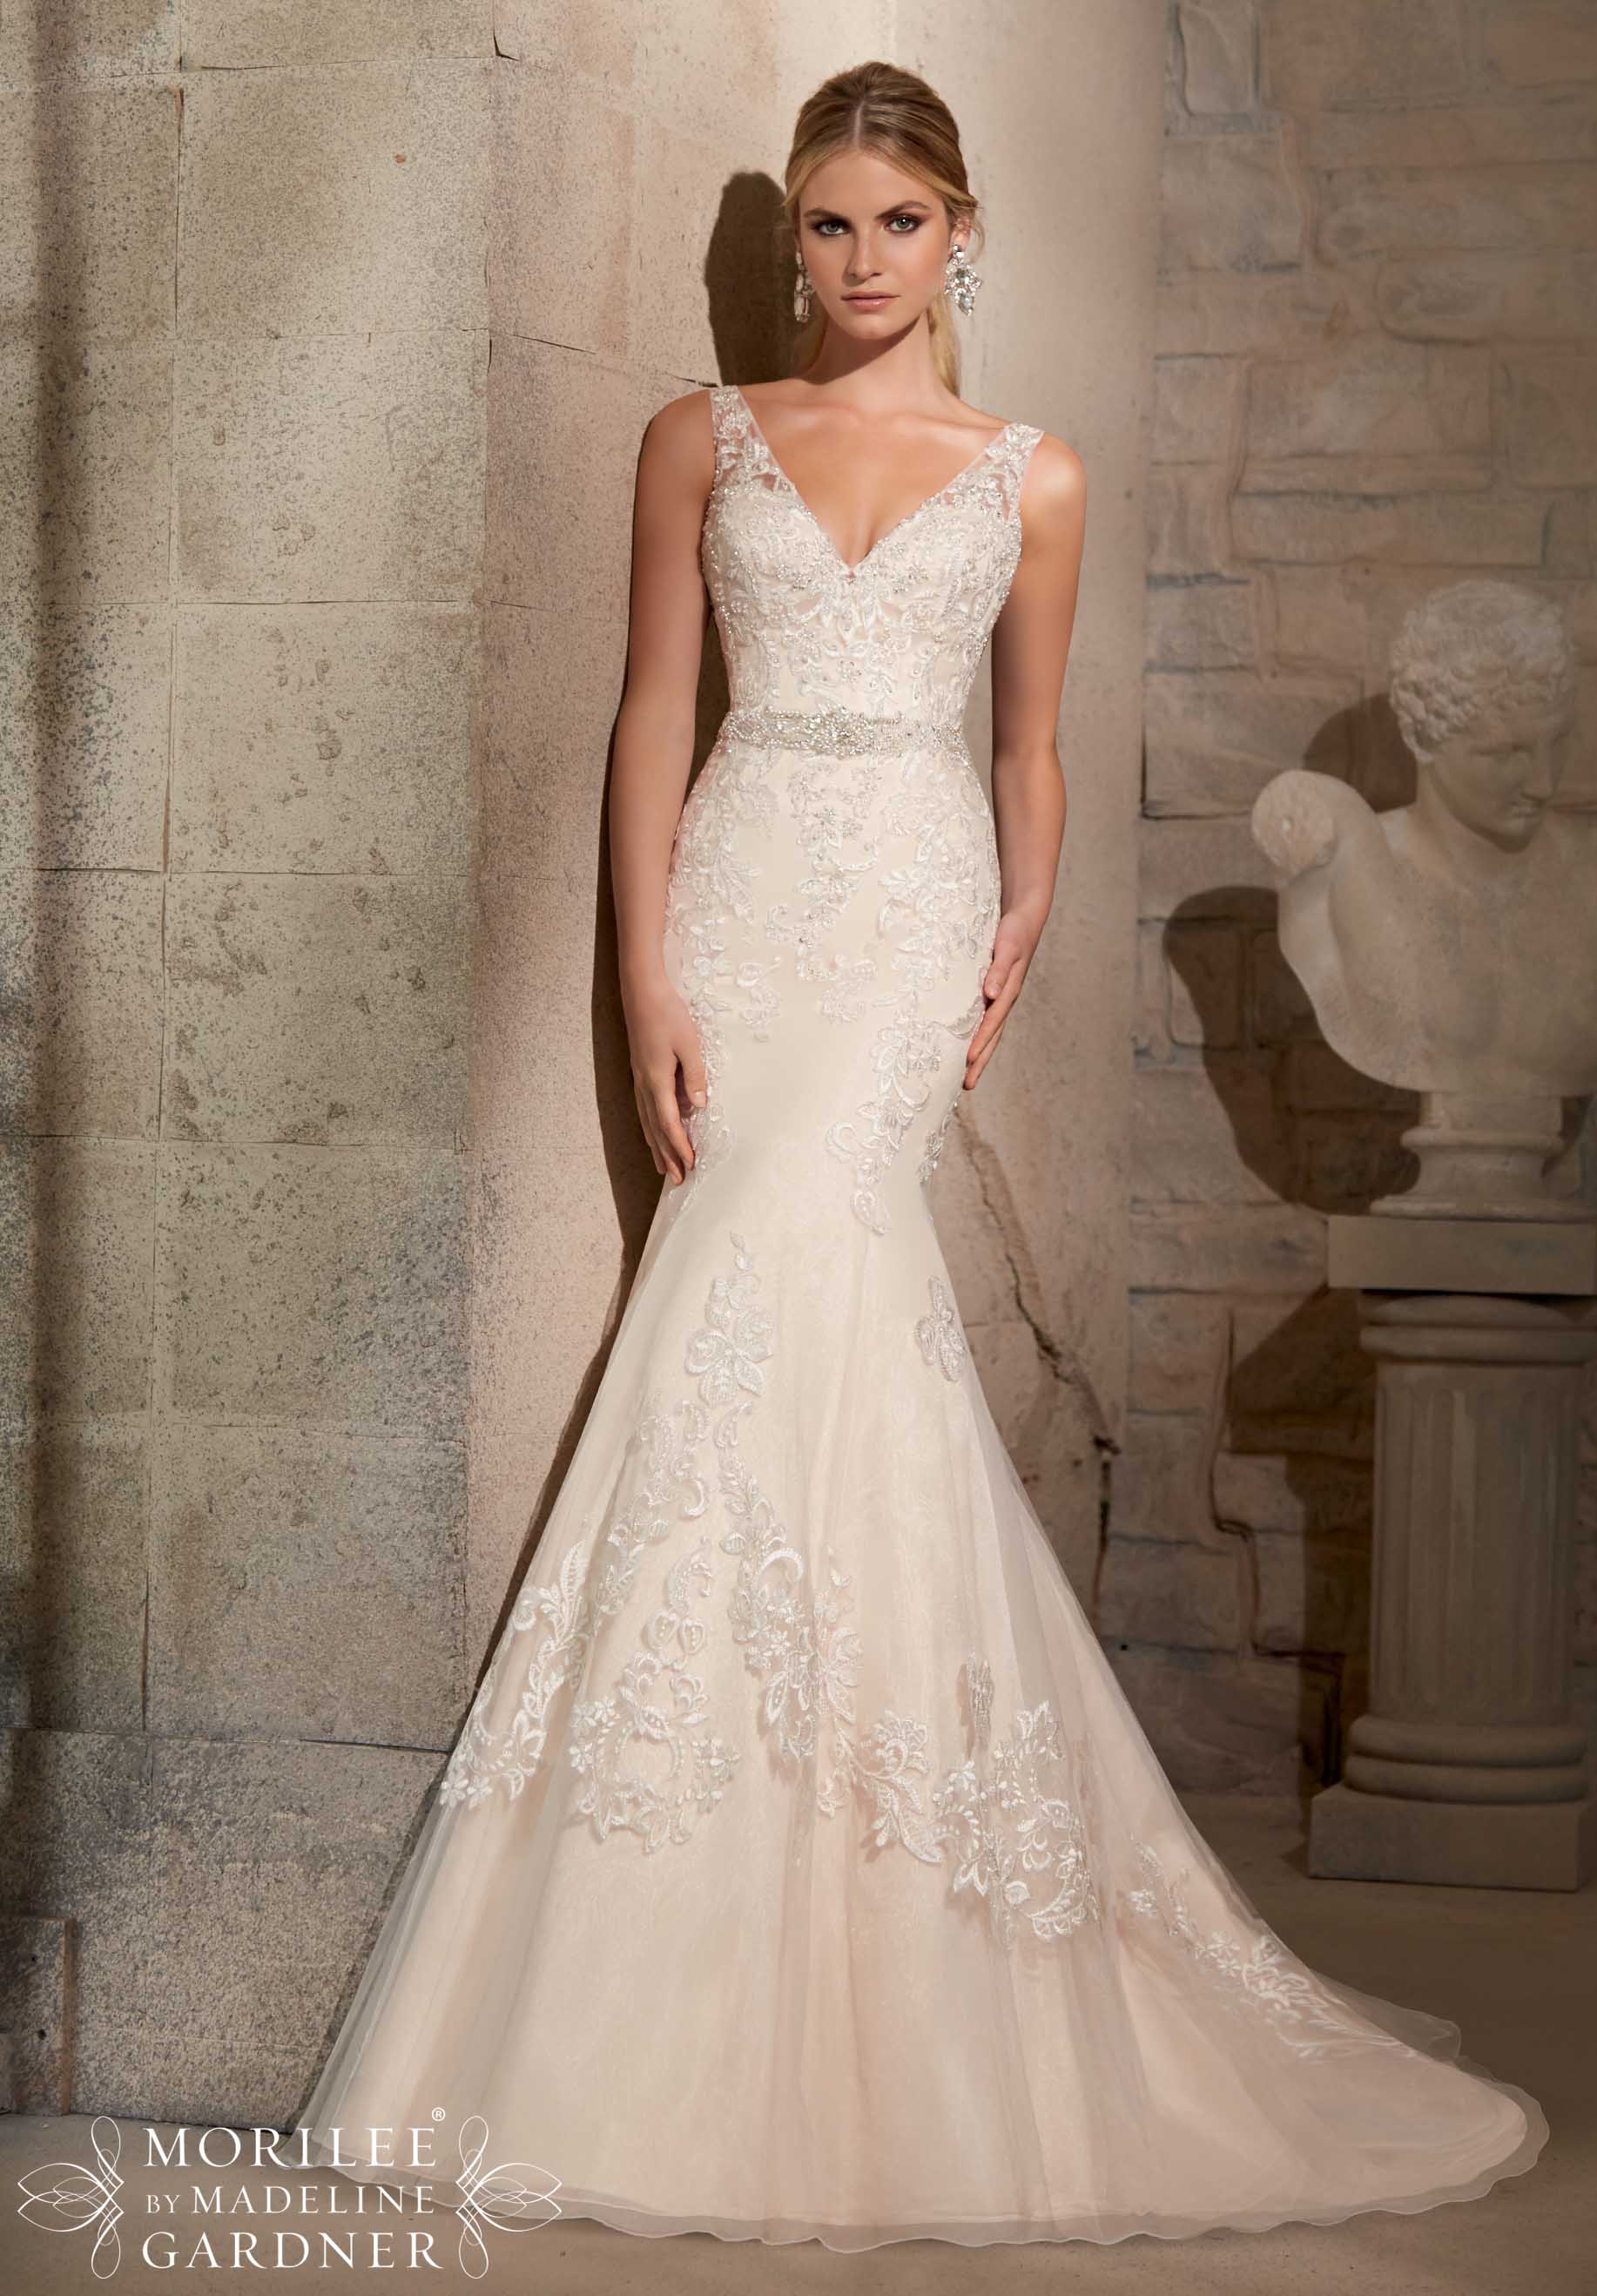 Dress - Mori Lee Bridal SPRING 2015 Collection: 2715 - Embroidered ...